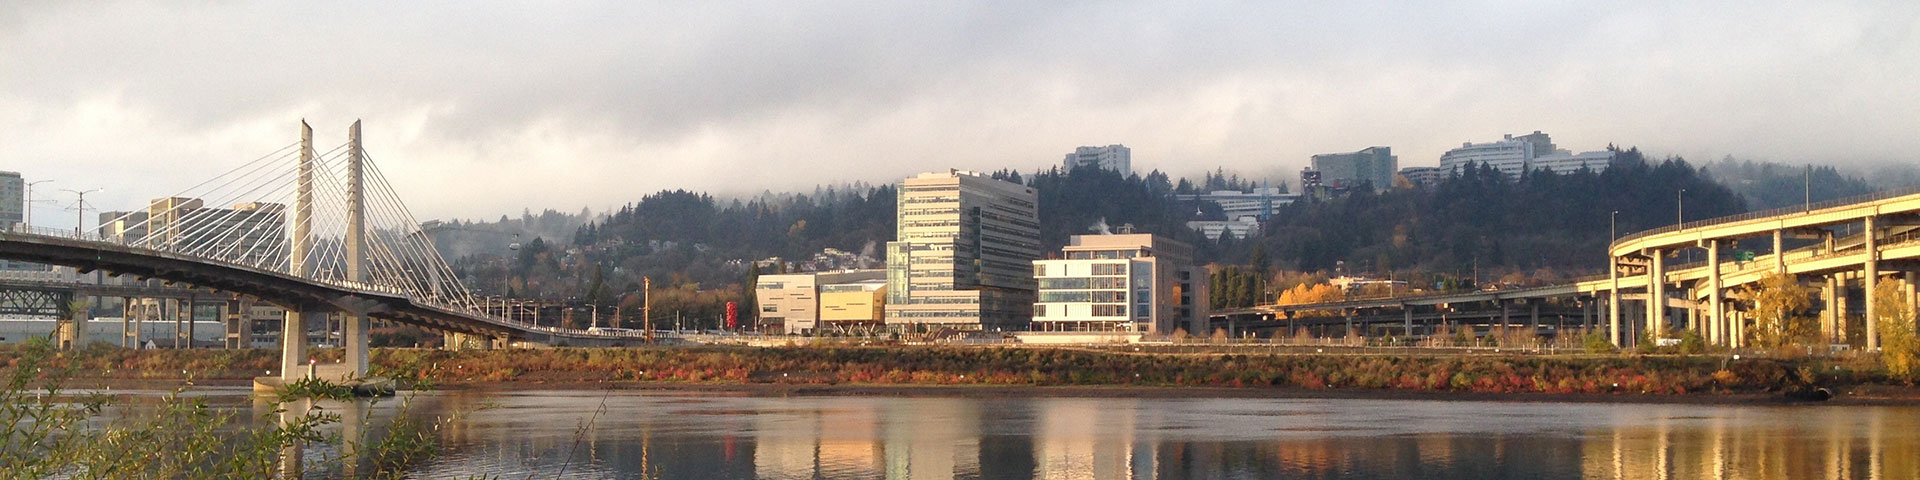 The Knight Cancer Research Building and Roberston Life Sciences Building as seen from across the Willamette River in the autumn